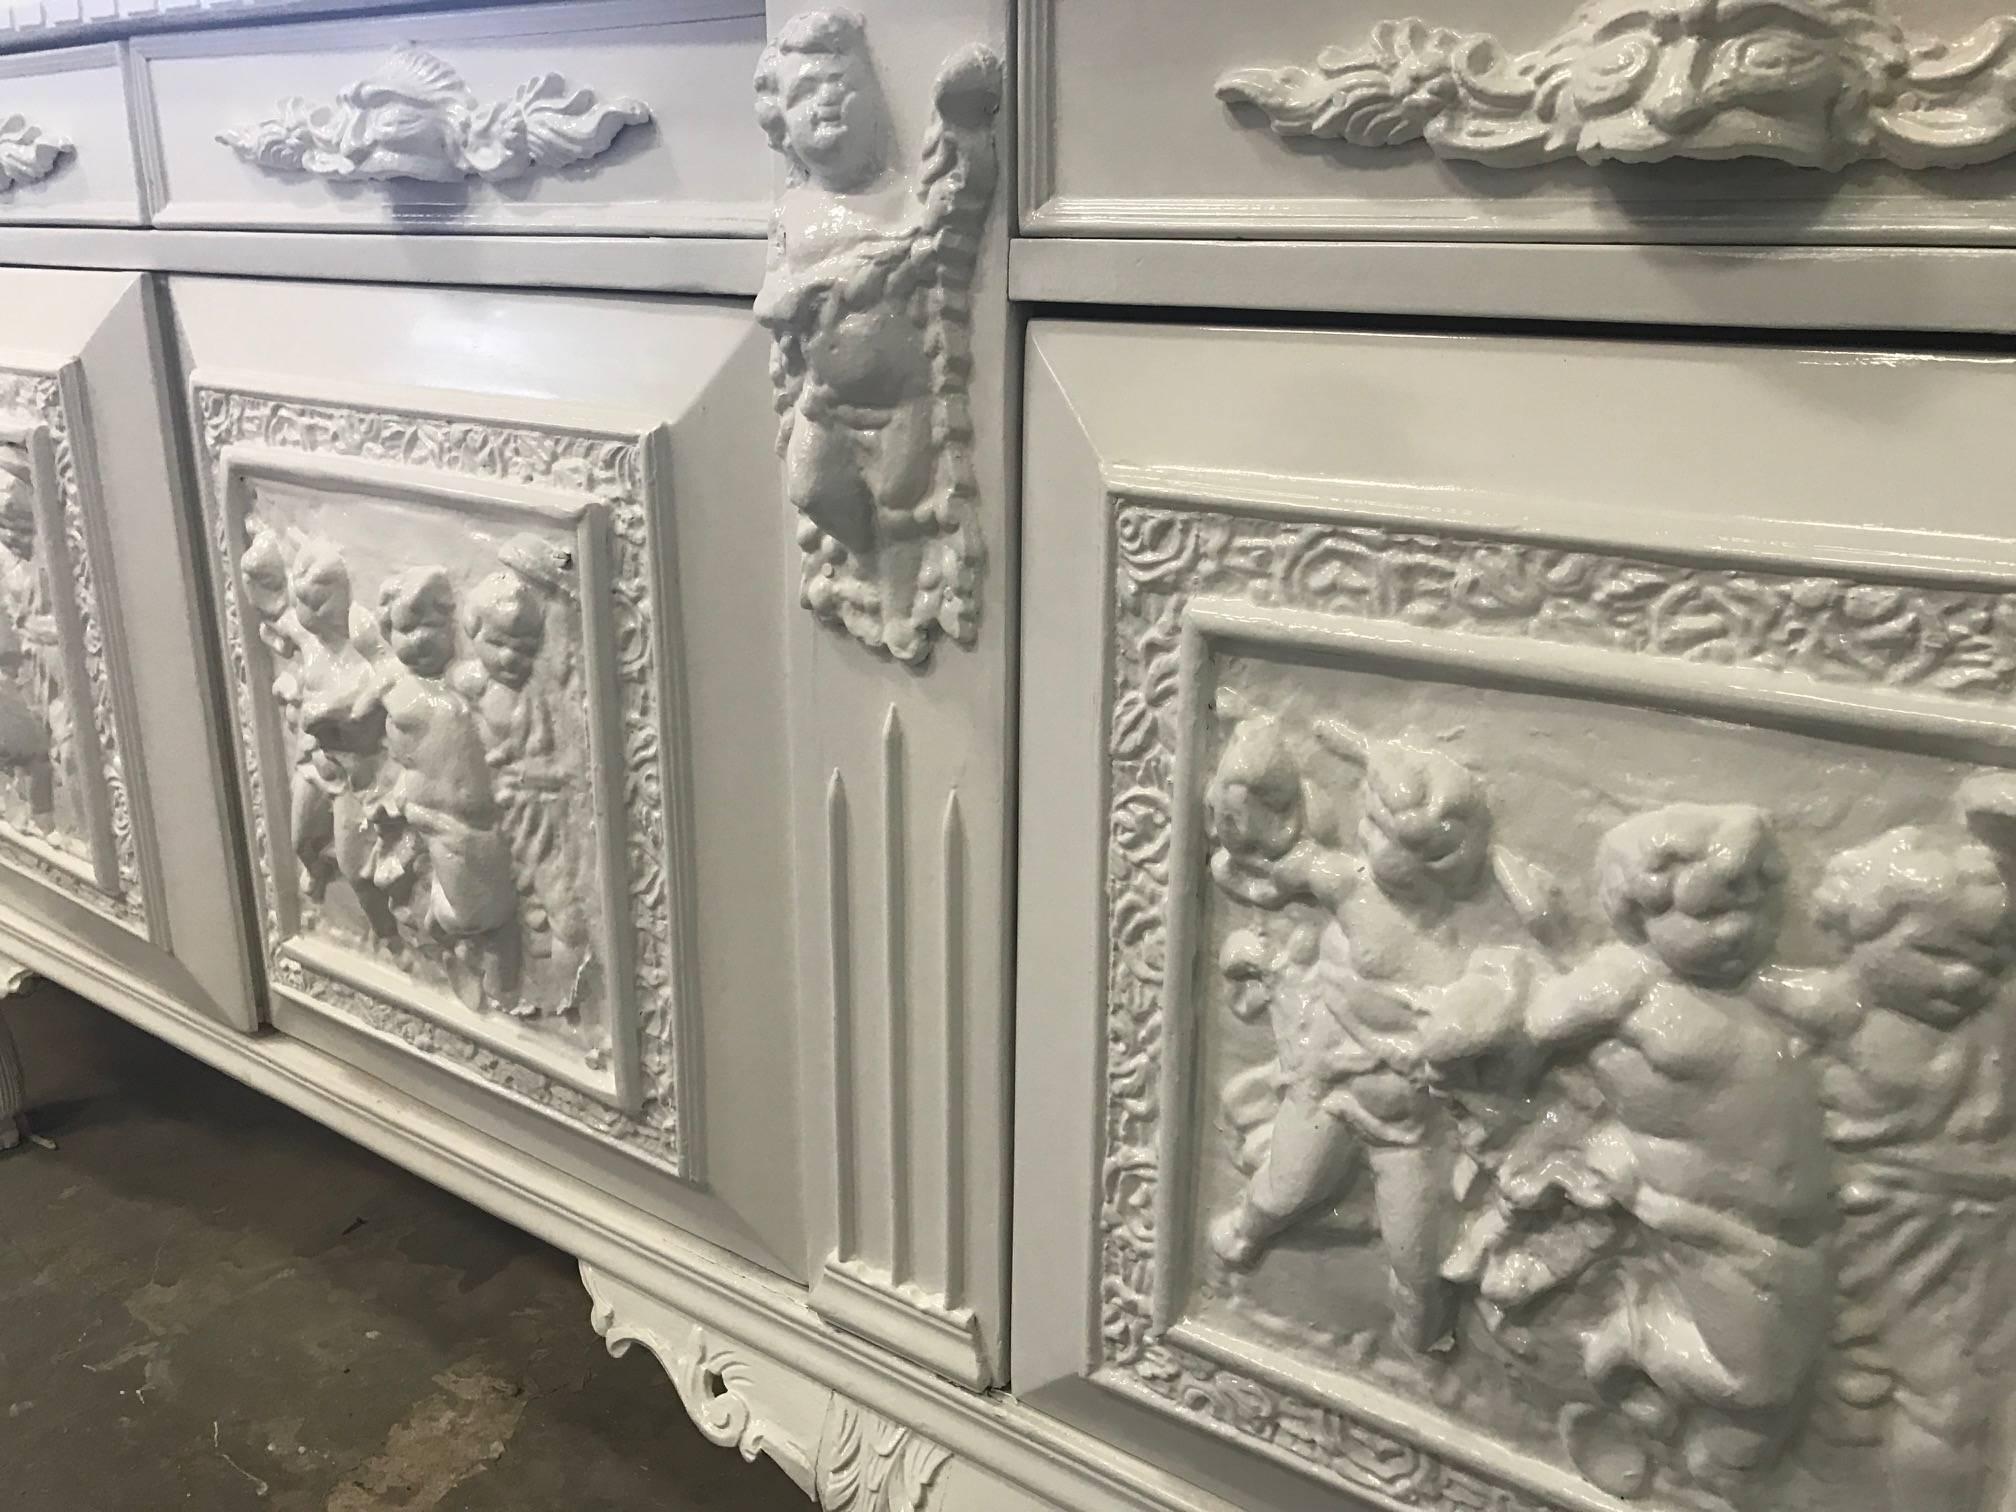 Monumental white lacquered modern Rococo side board/ console/ kitchen island/ (Be Creative) - European made and hand-carved Cherubs! Fabulous! Beautiful shabby chic design. European flair - - This piece is spectacularly made and acquired from a